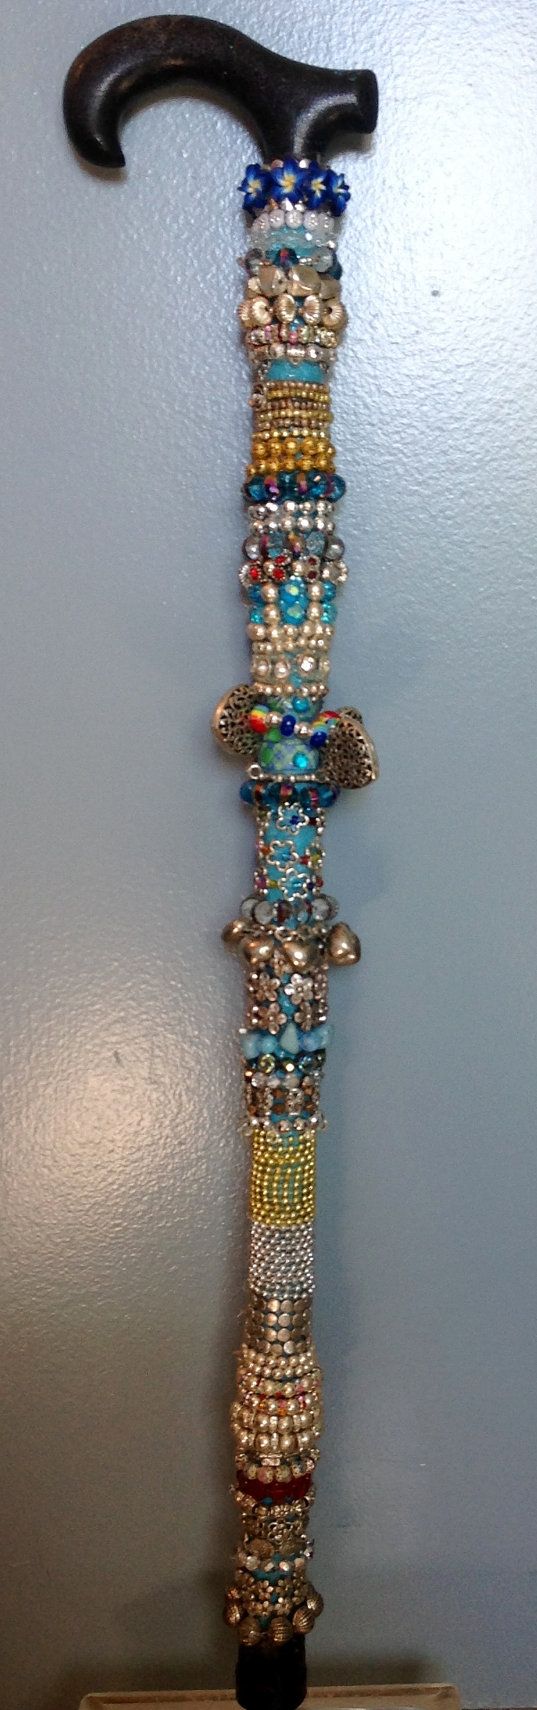 Decorative Beaded Cane and Walking Stick by annielaine on Etsy, $120.00